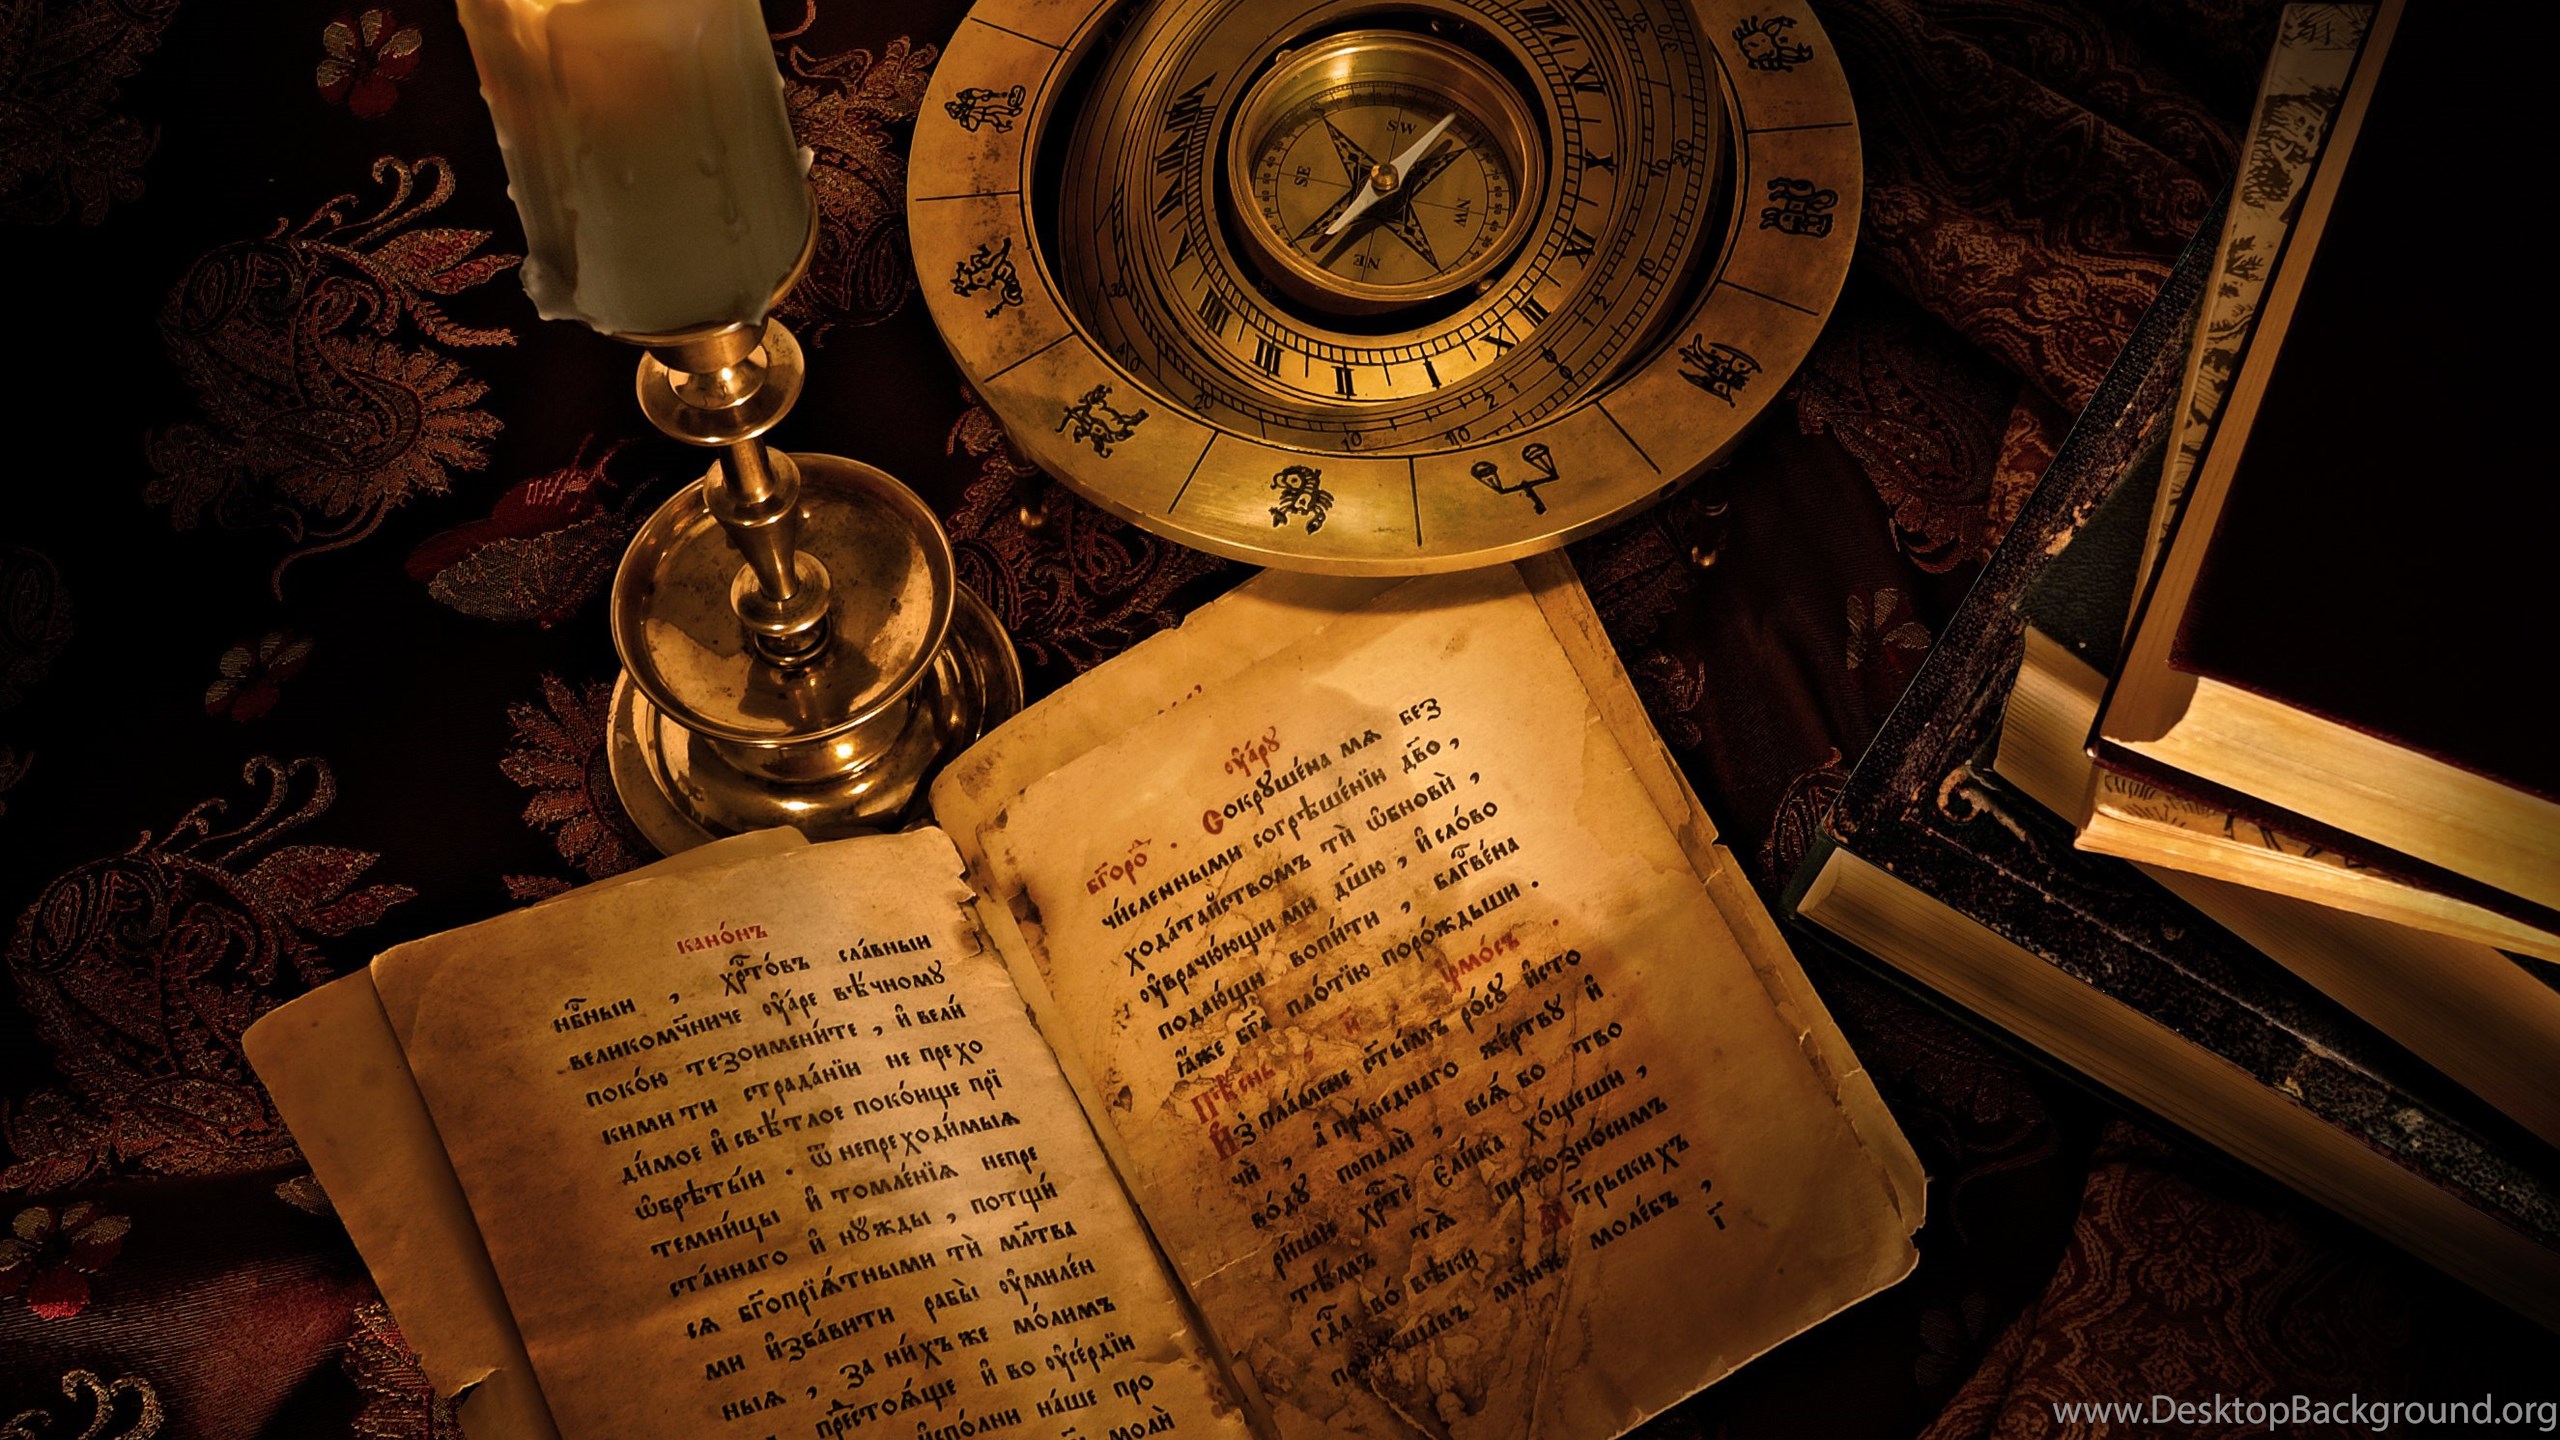 Old Book And Compass Wallpaper And Image Wallpaper, Picture. Desktop Background